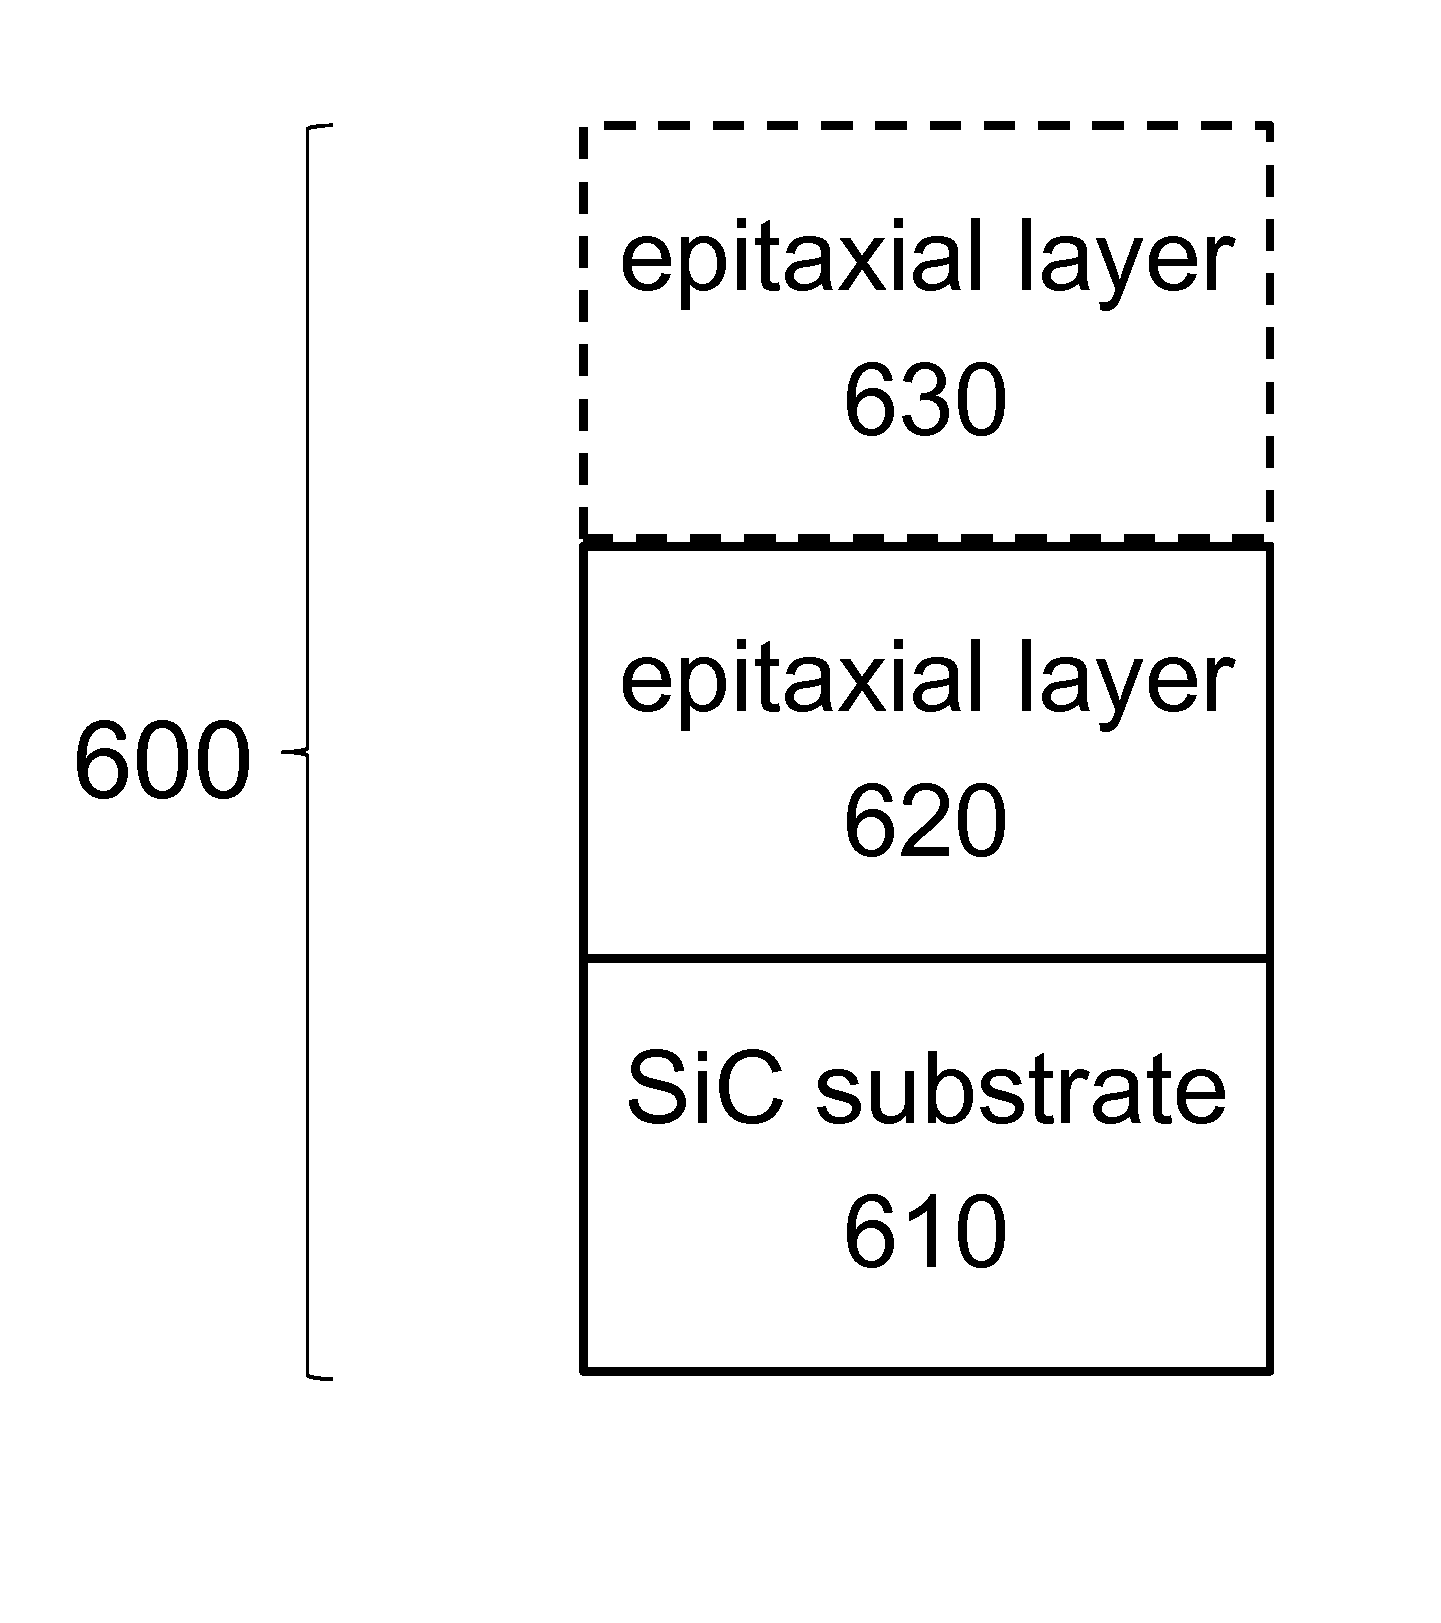 SiC SUBSTRATE WITH SiC EPITAXIAL FILM